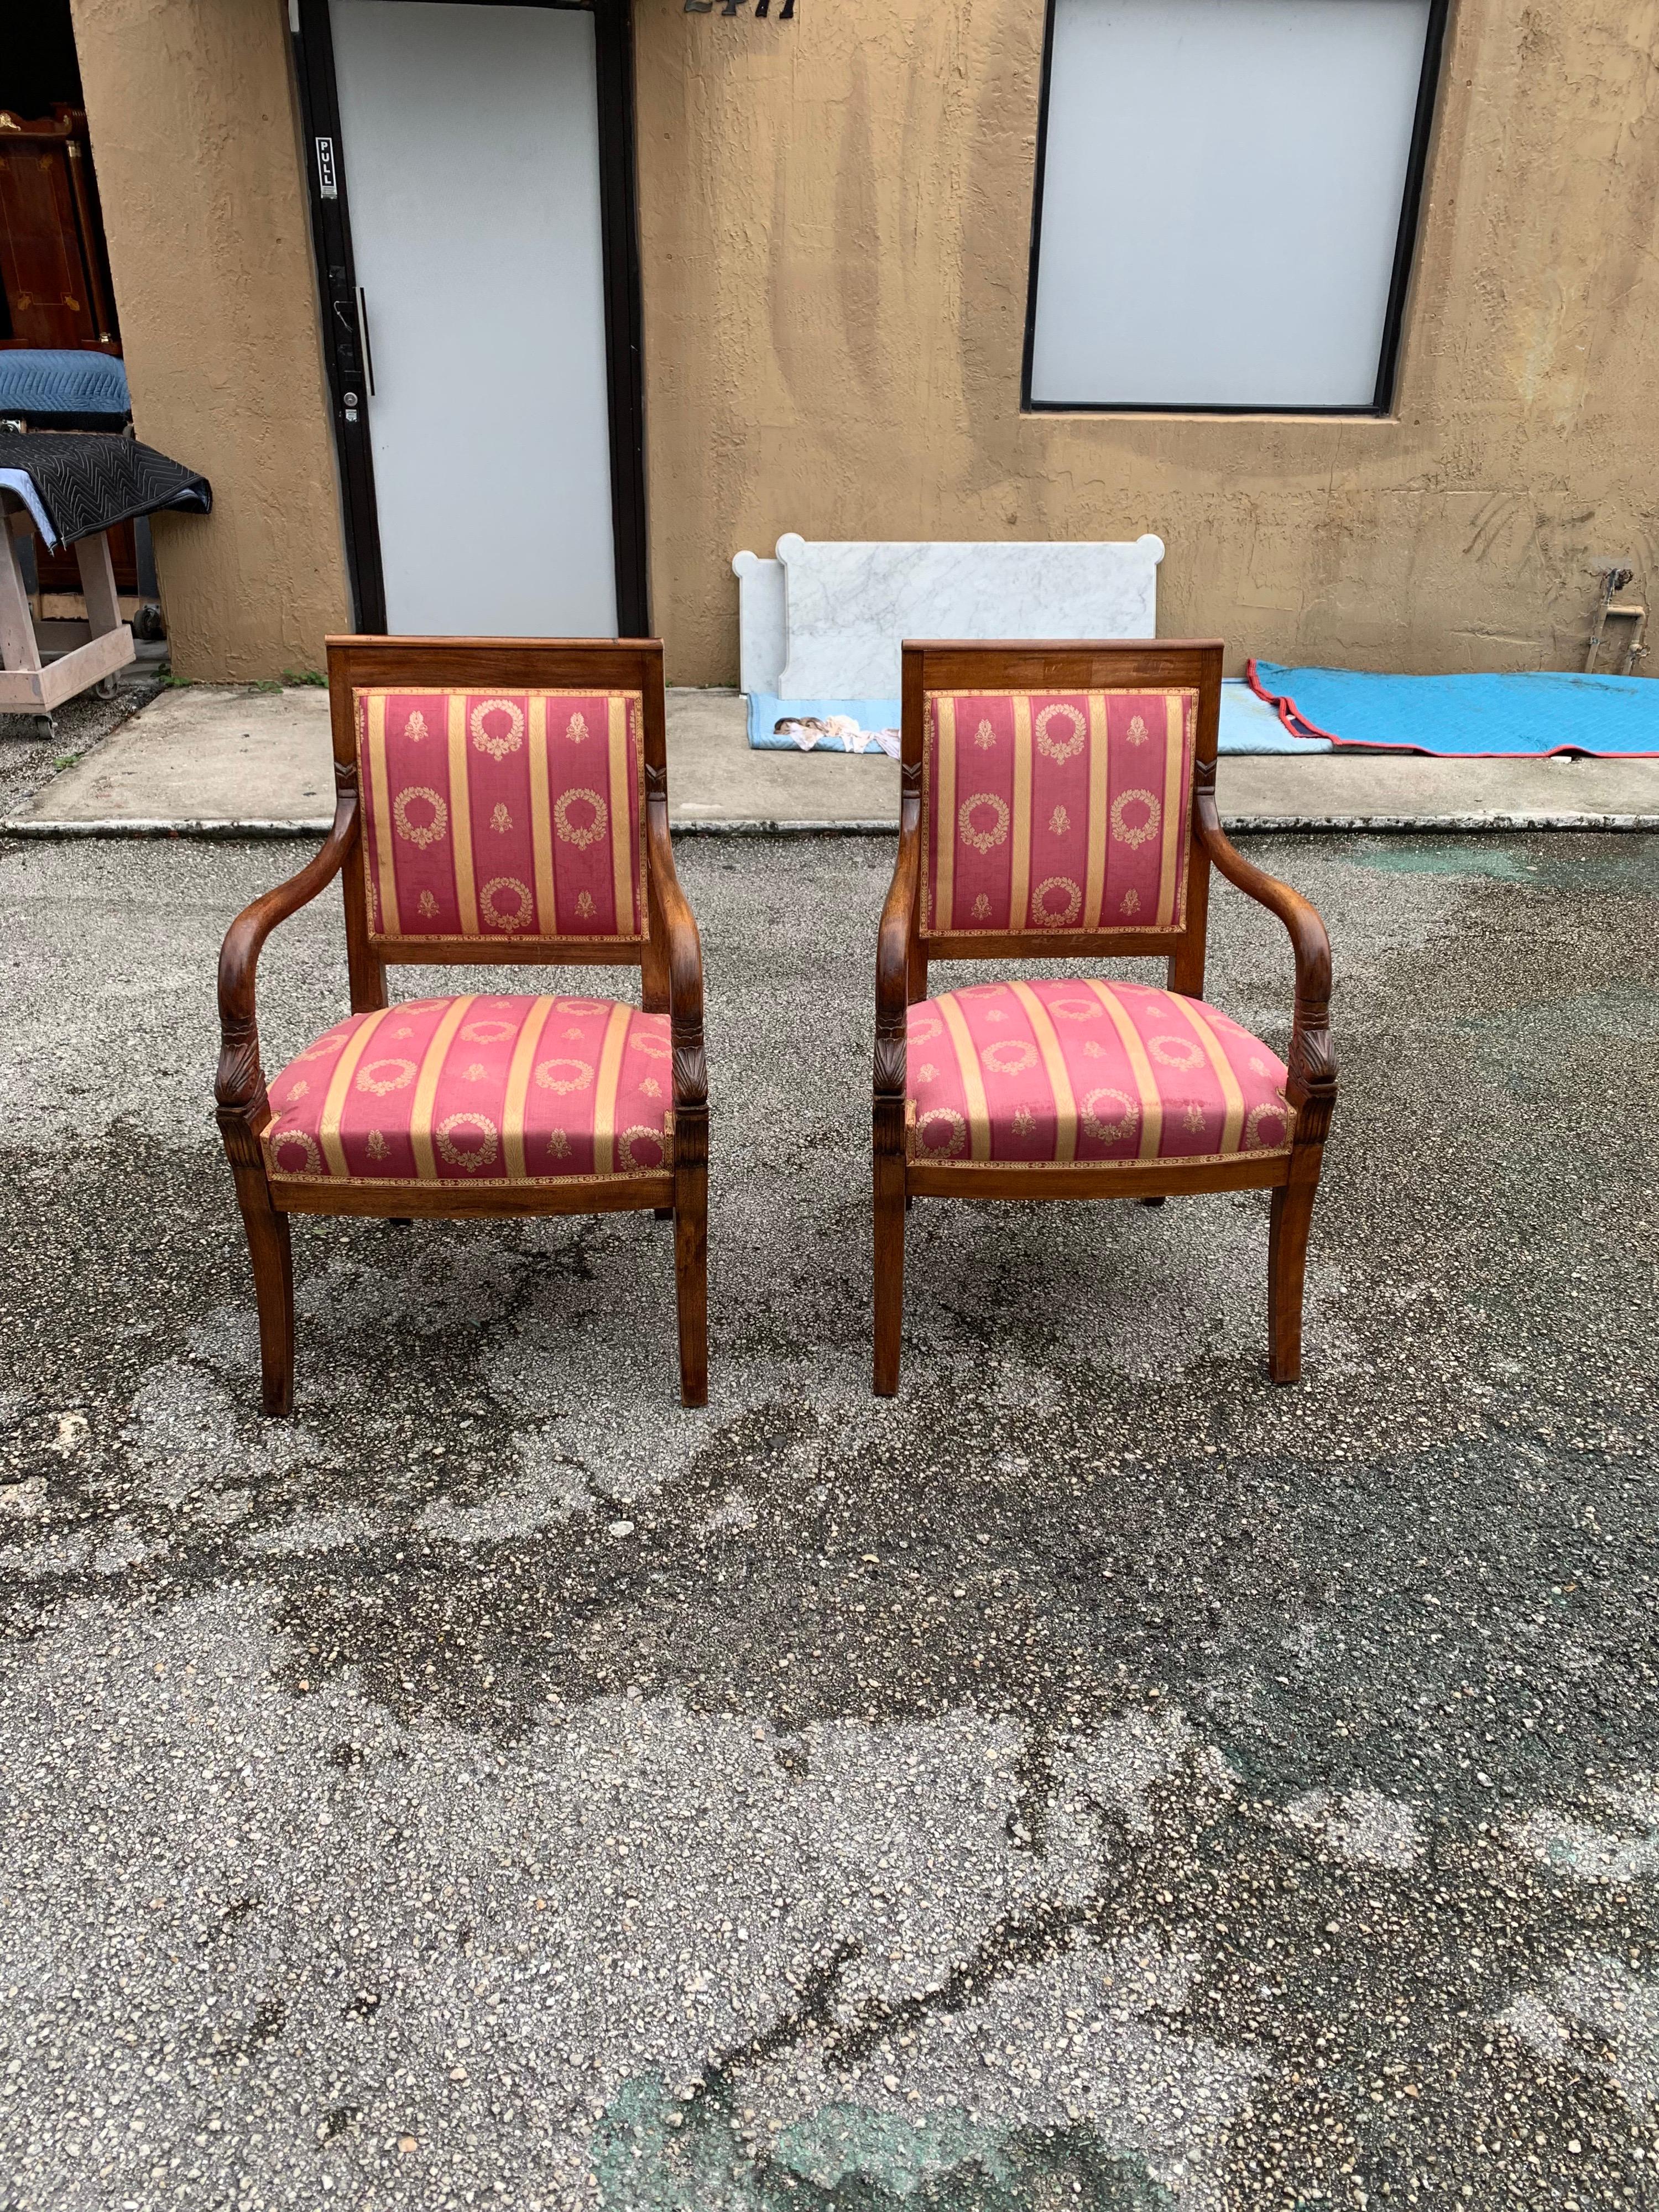 Fine pair of French Empire style solid mahogany accent chairs or bergère chairs 1910s, vintage silk fabric upholstery, the solid mahogany chair frames are in excellent condition. (Fabric silk is in very good condition, but the silk need to be change